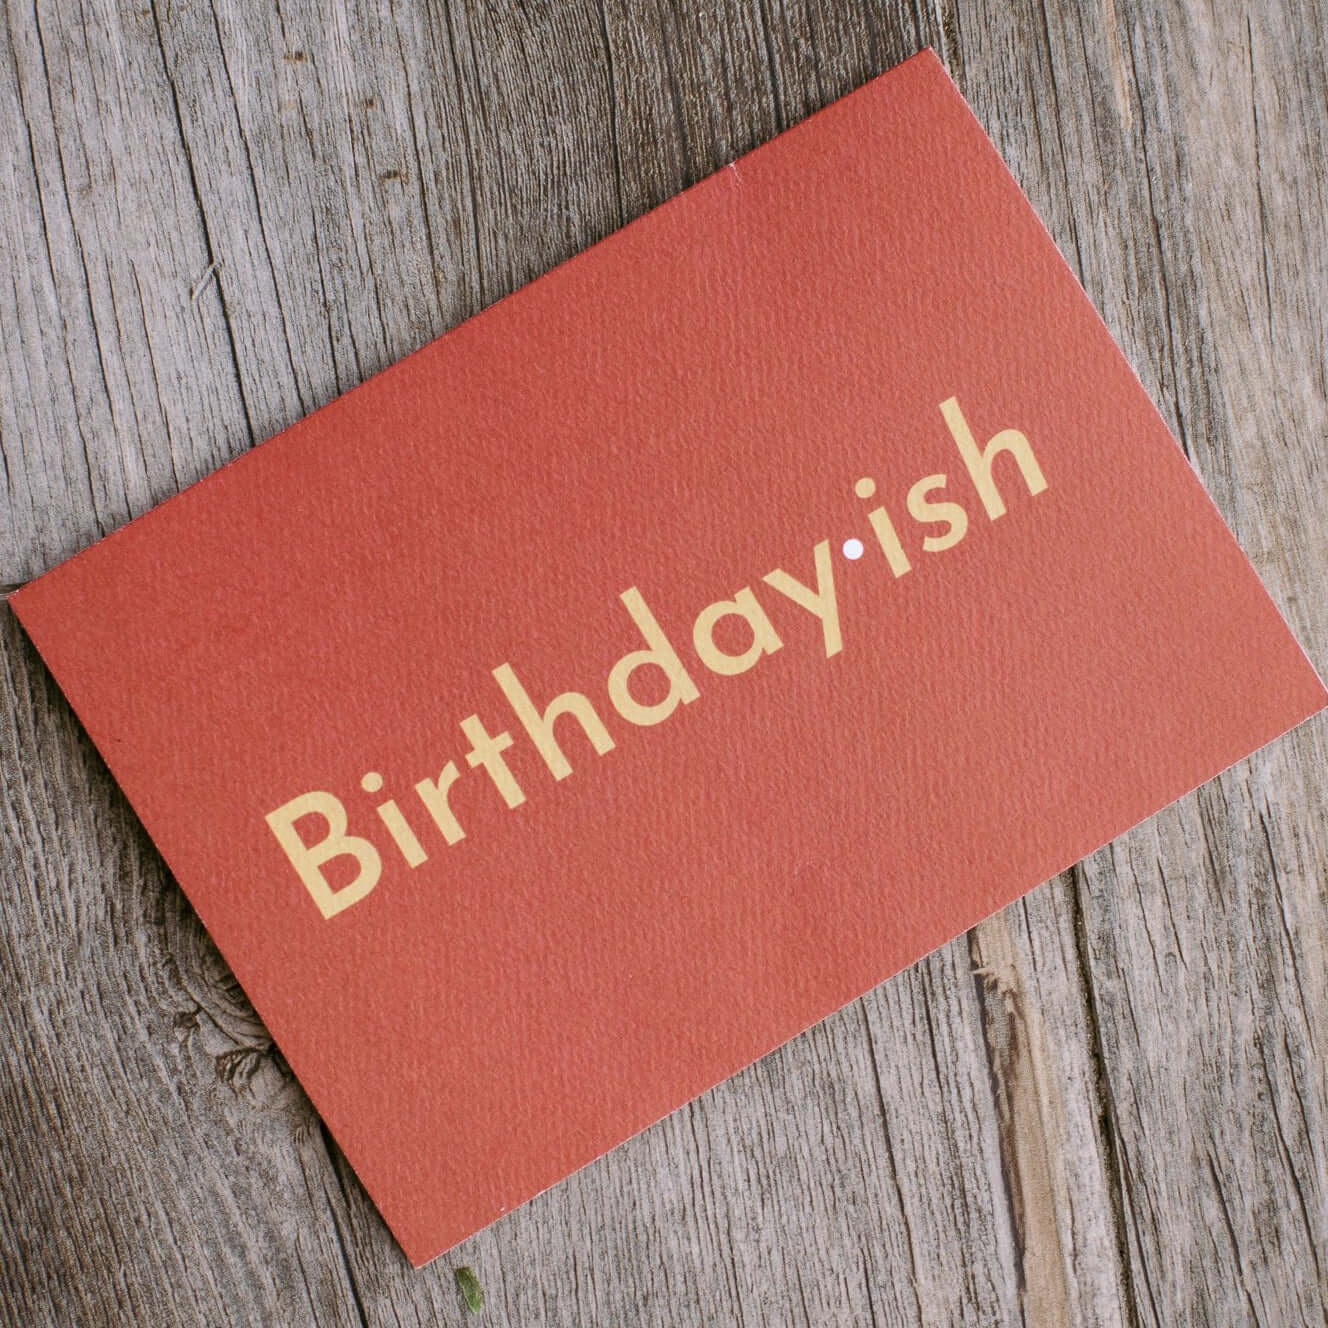 red card that reads "Birthdayish" in tan lettering with a white interpunct between "birthday" and "ish"